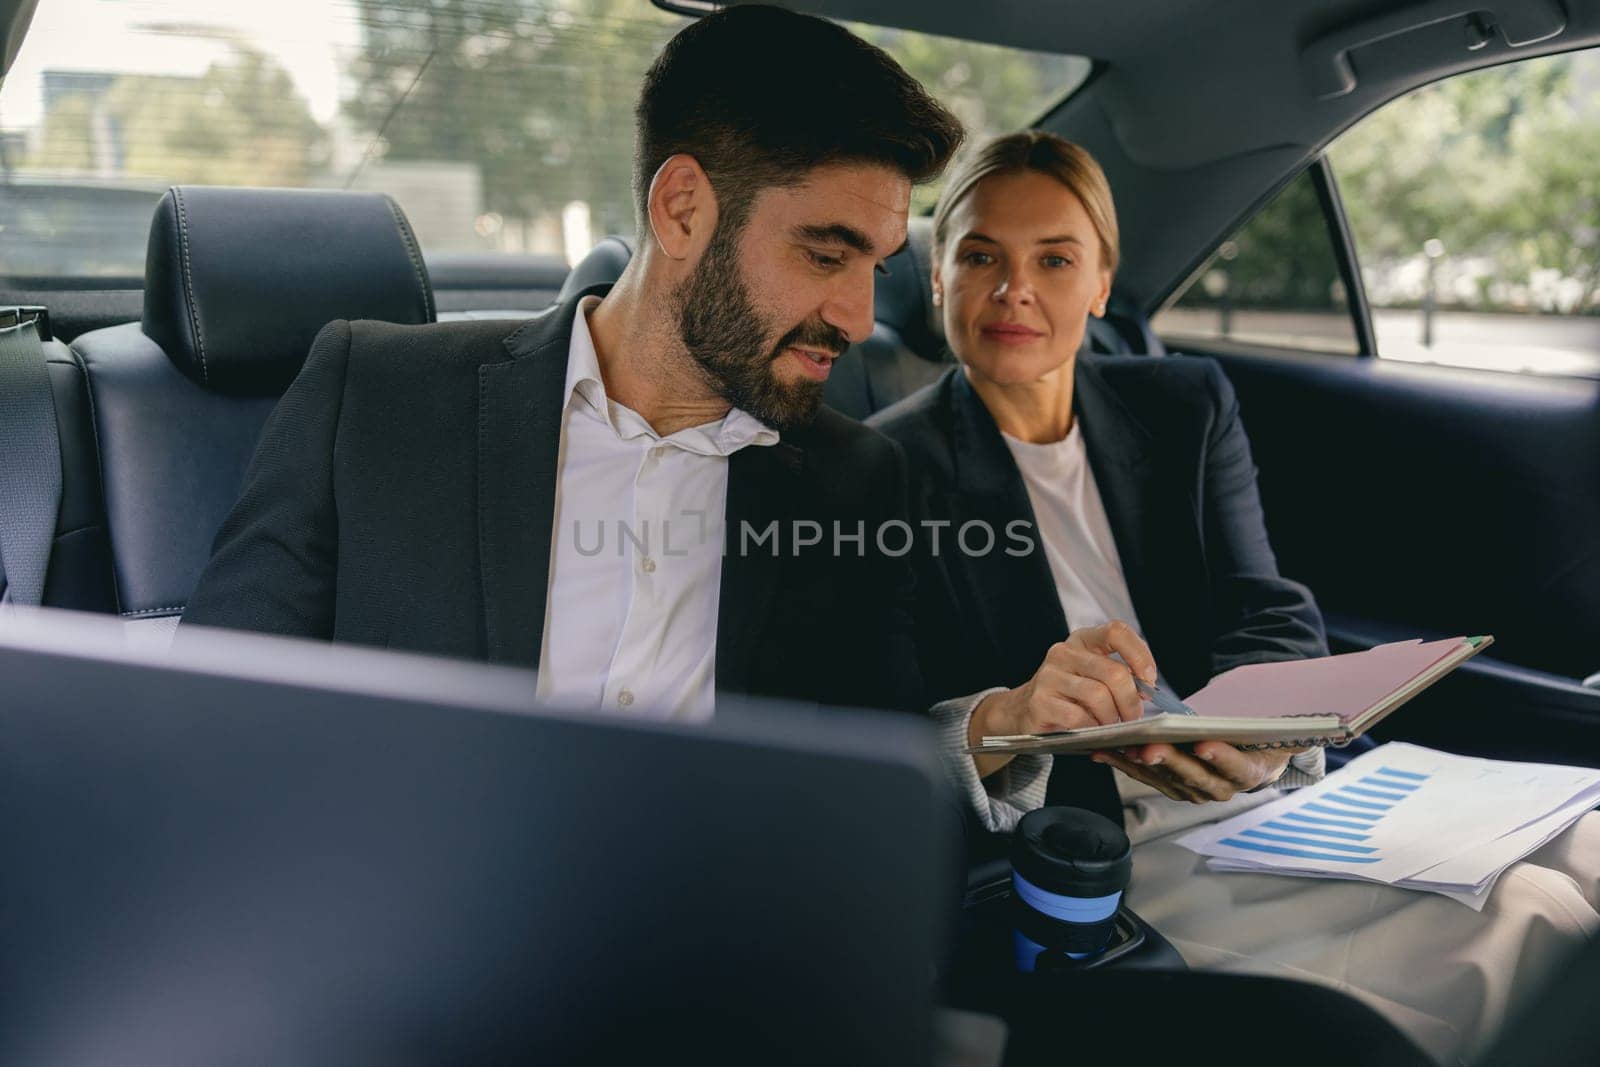 Focused business analysts have online meeting using laptop while sitting in car back seats by Yaroslav_astakhov